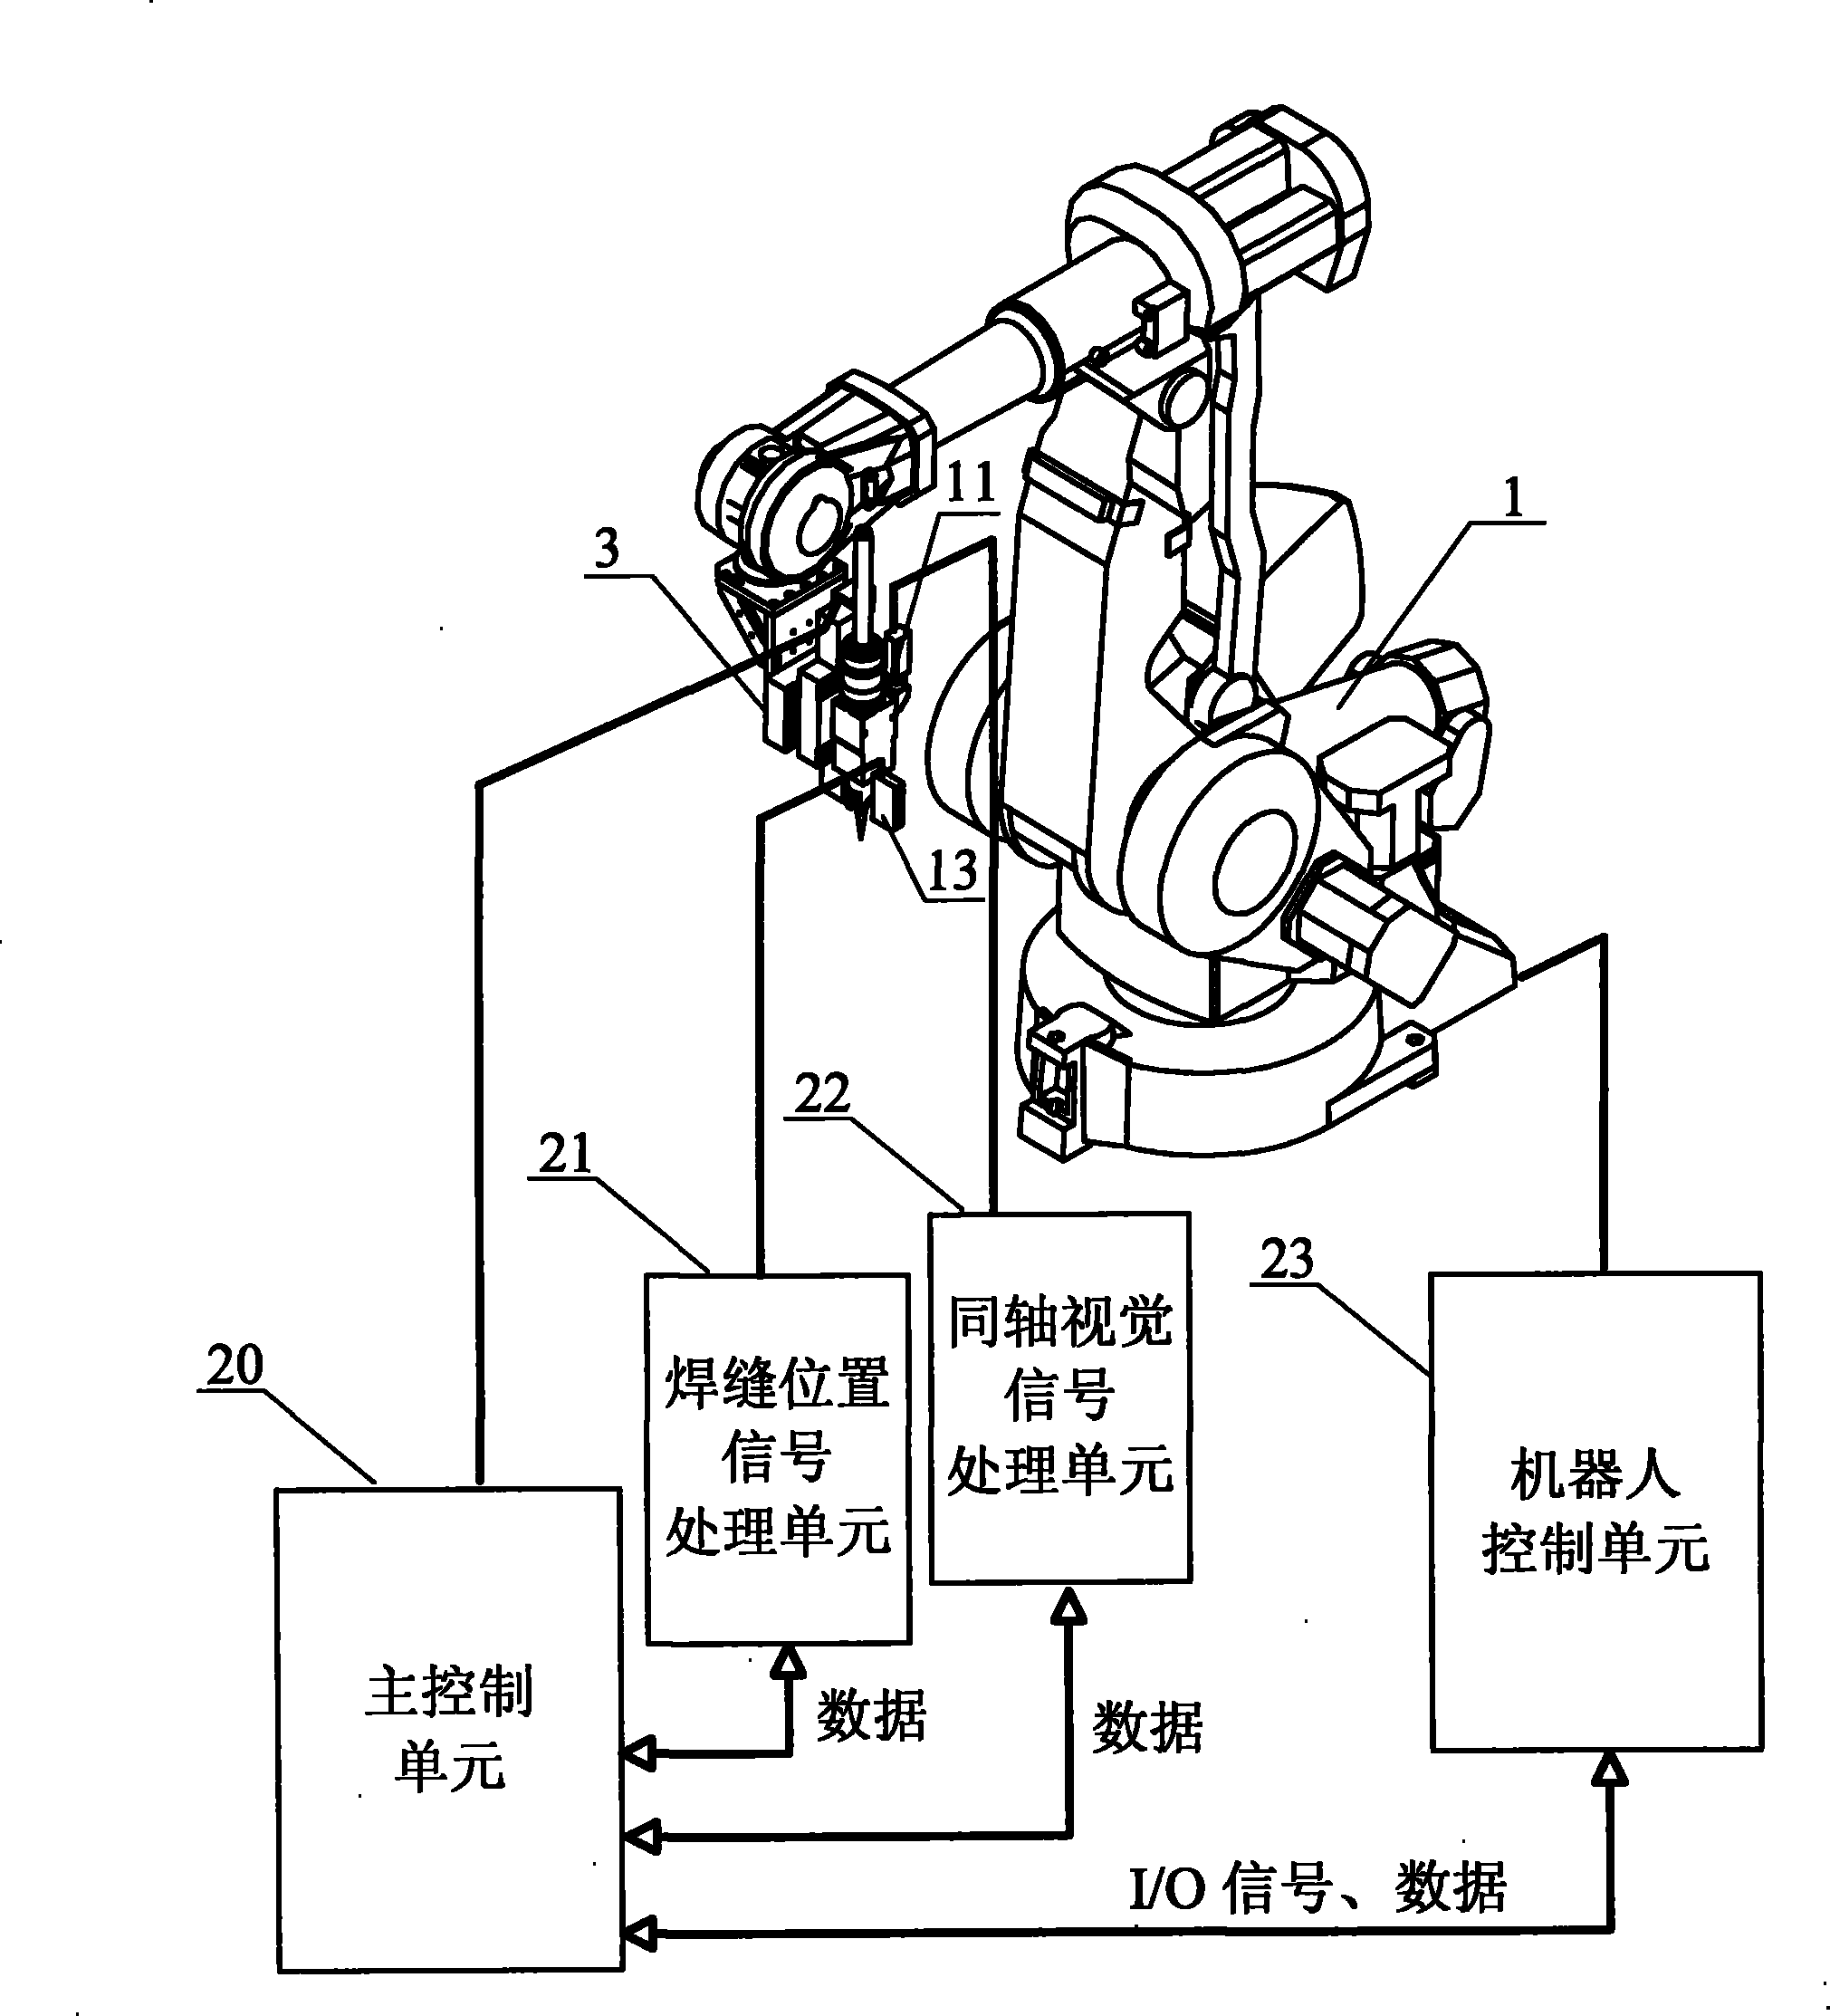 Device and method for making robot track given route at high accuracy